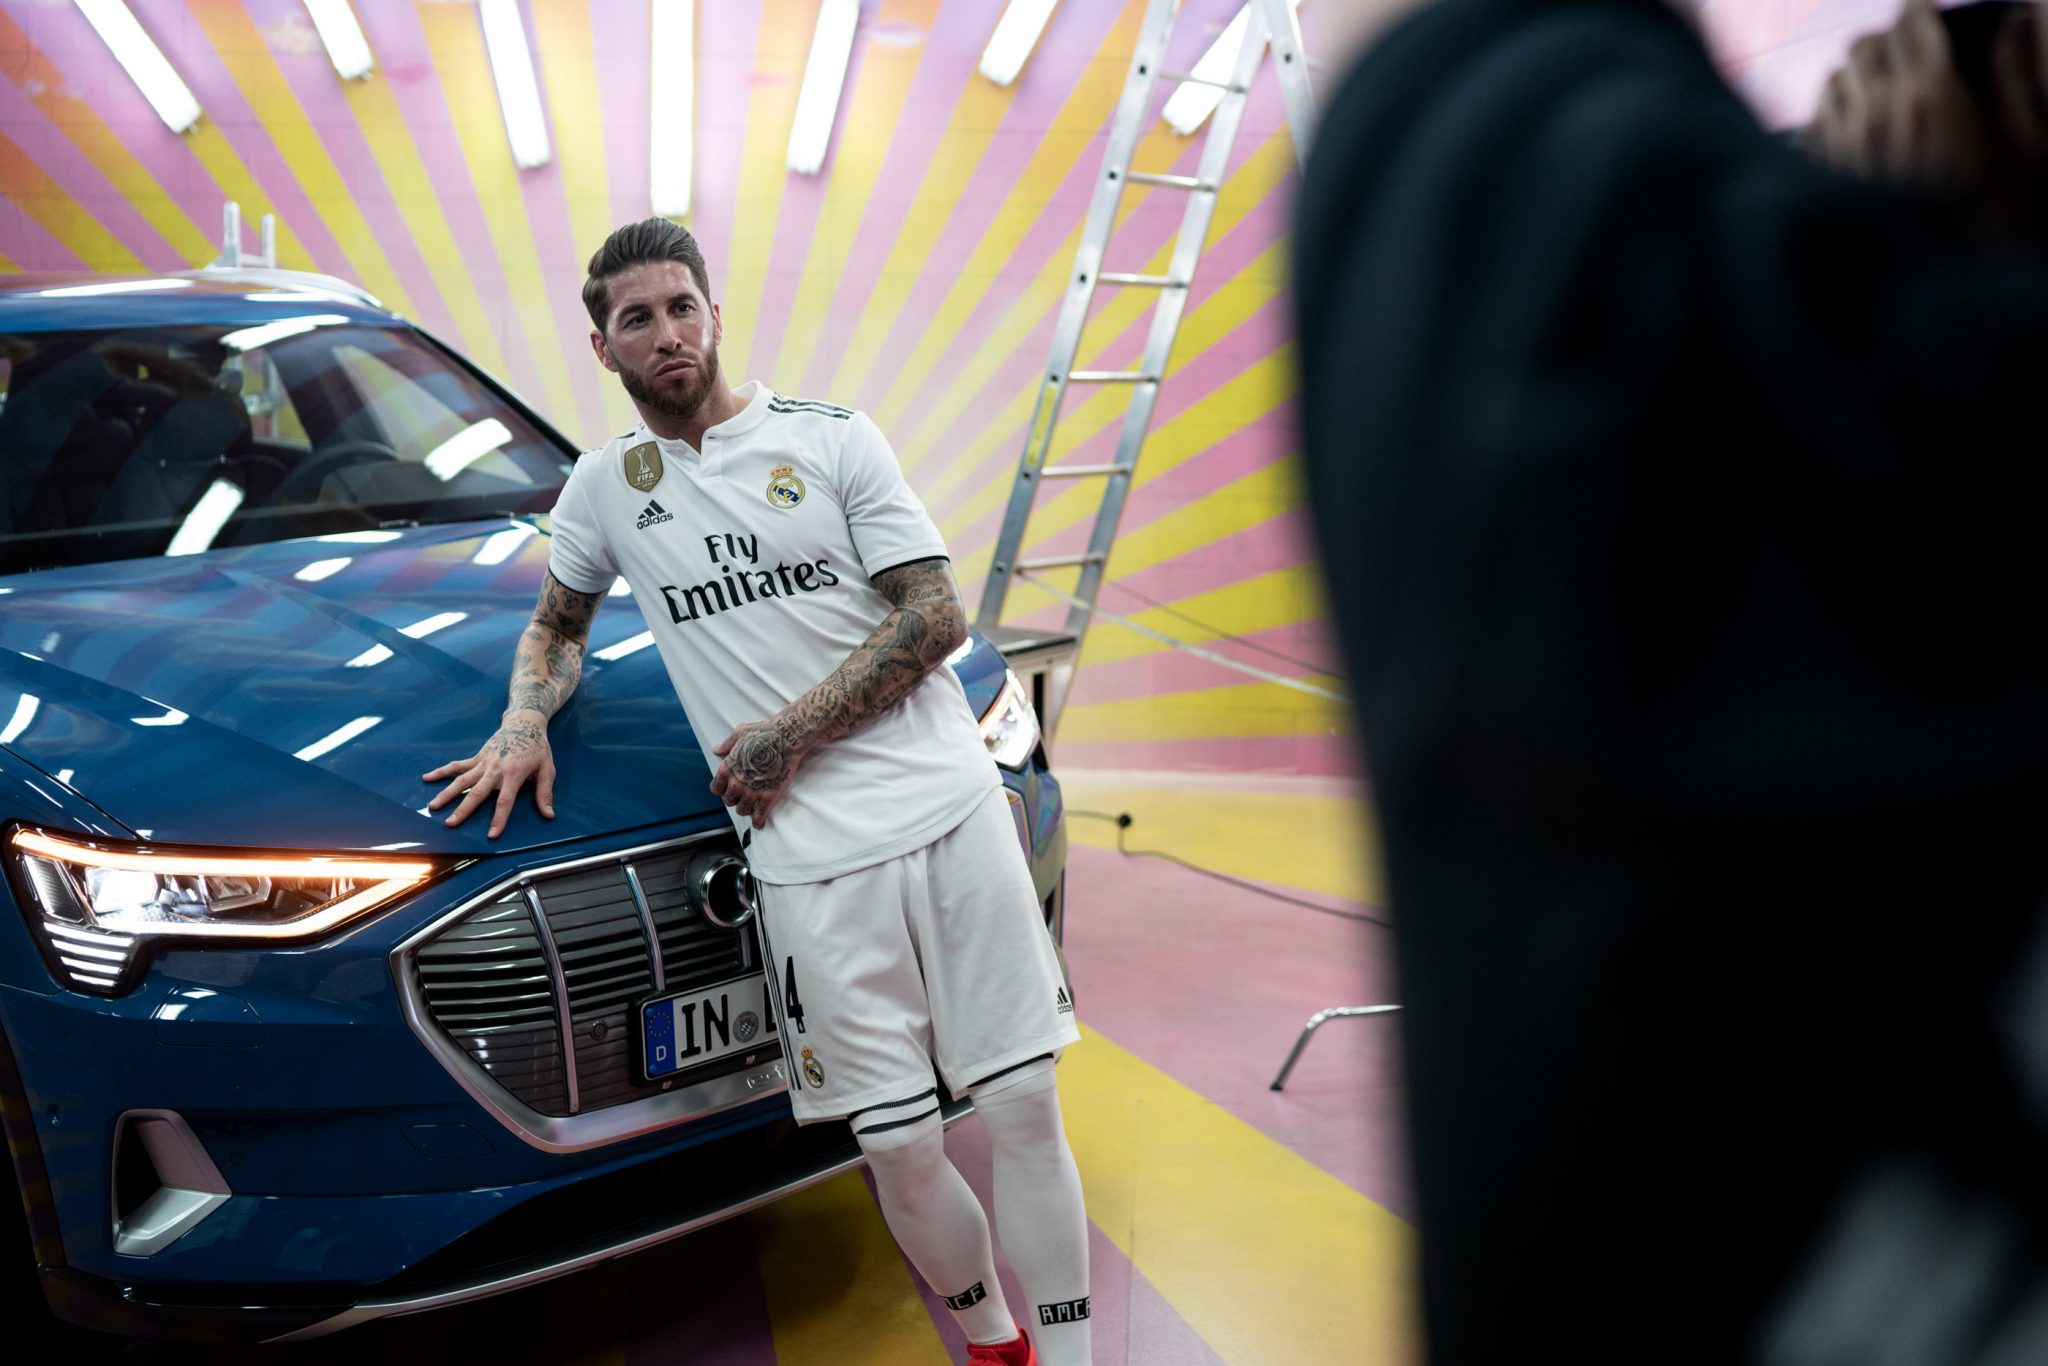 David LaChapelle | Audi x Real Madrid | Behind-the-scenes photographs from the Audi E-tron launch shoot in Madrid. | 18